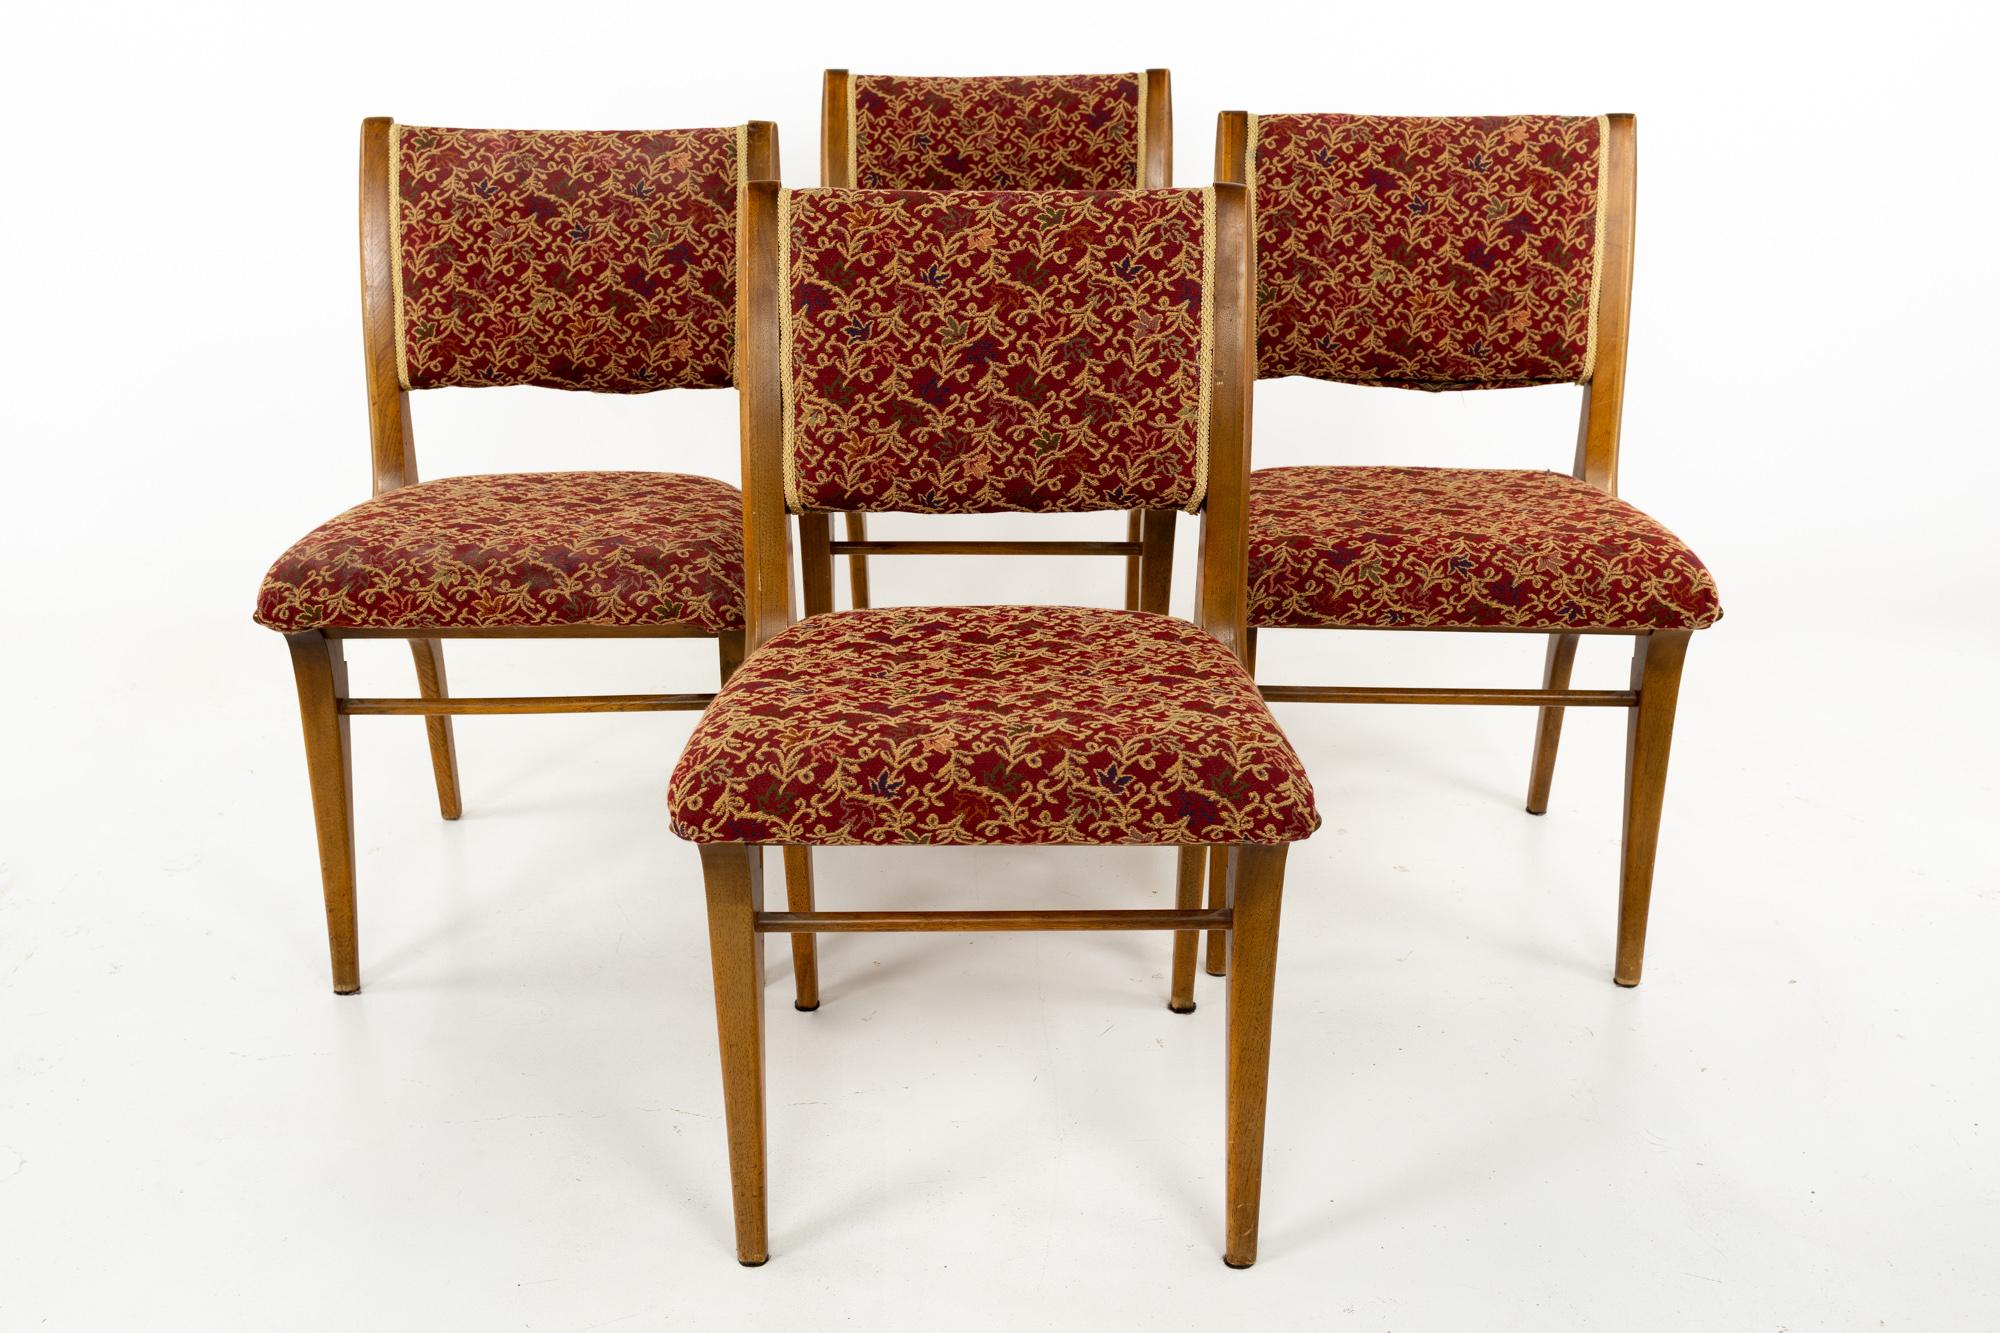 John Van Koert for Drexel profile Mid Century dining chairs - set of 4.
These chairs are 21 wide x 22 deep x 34.5 inches high, with a seat height of 20 inches

This piece is available in what we call restored vintage condition. Upon purchase it is